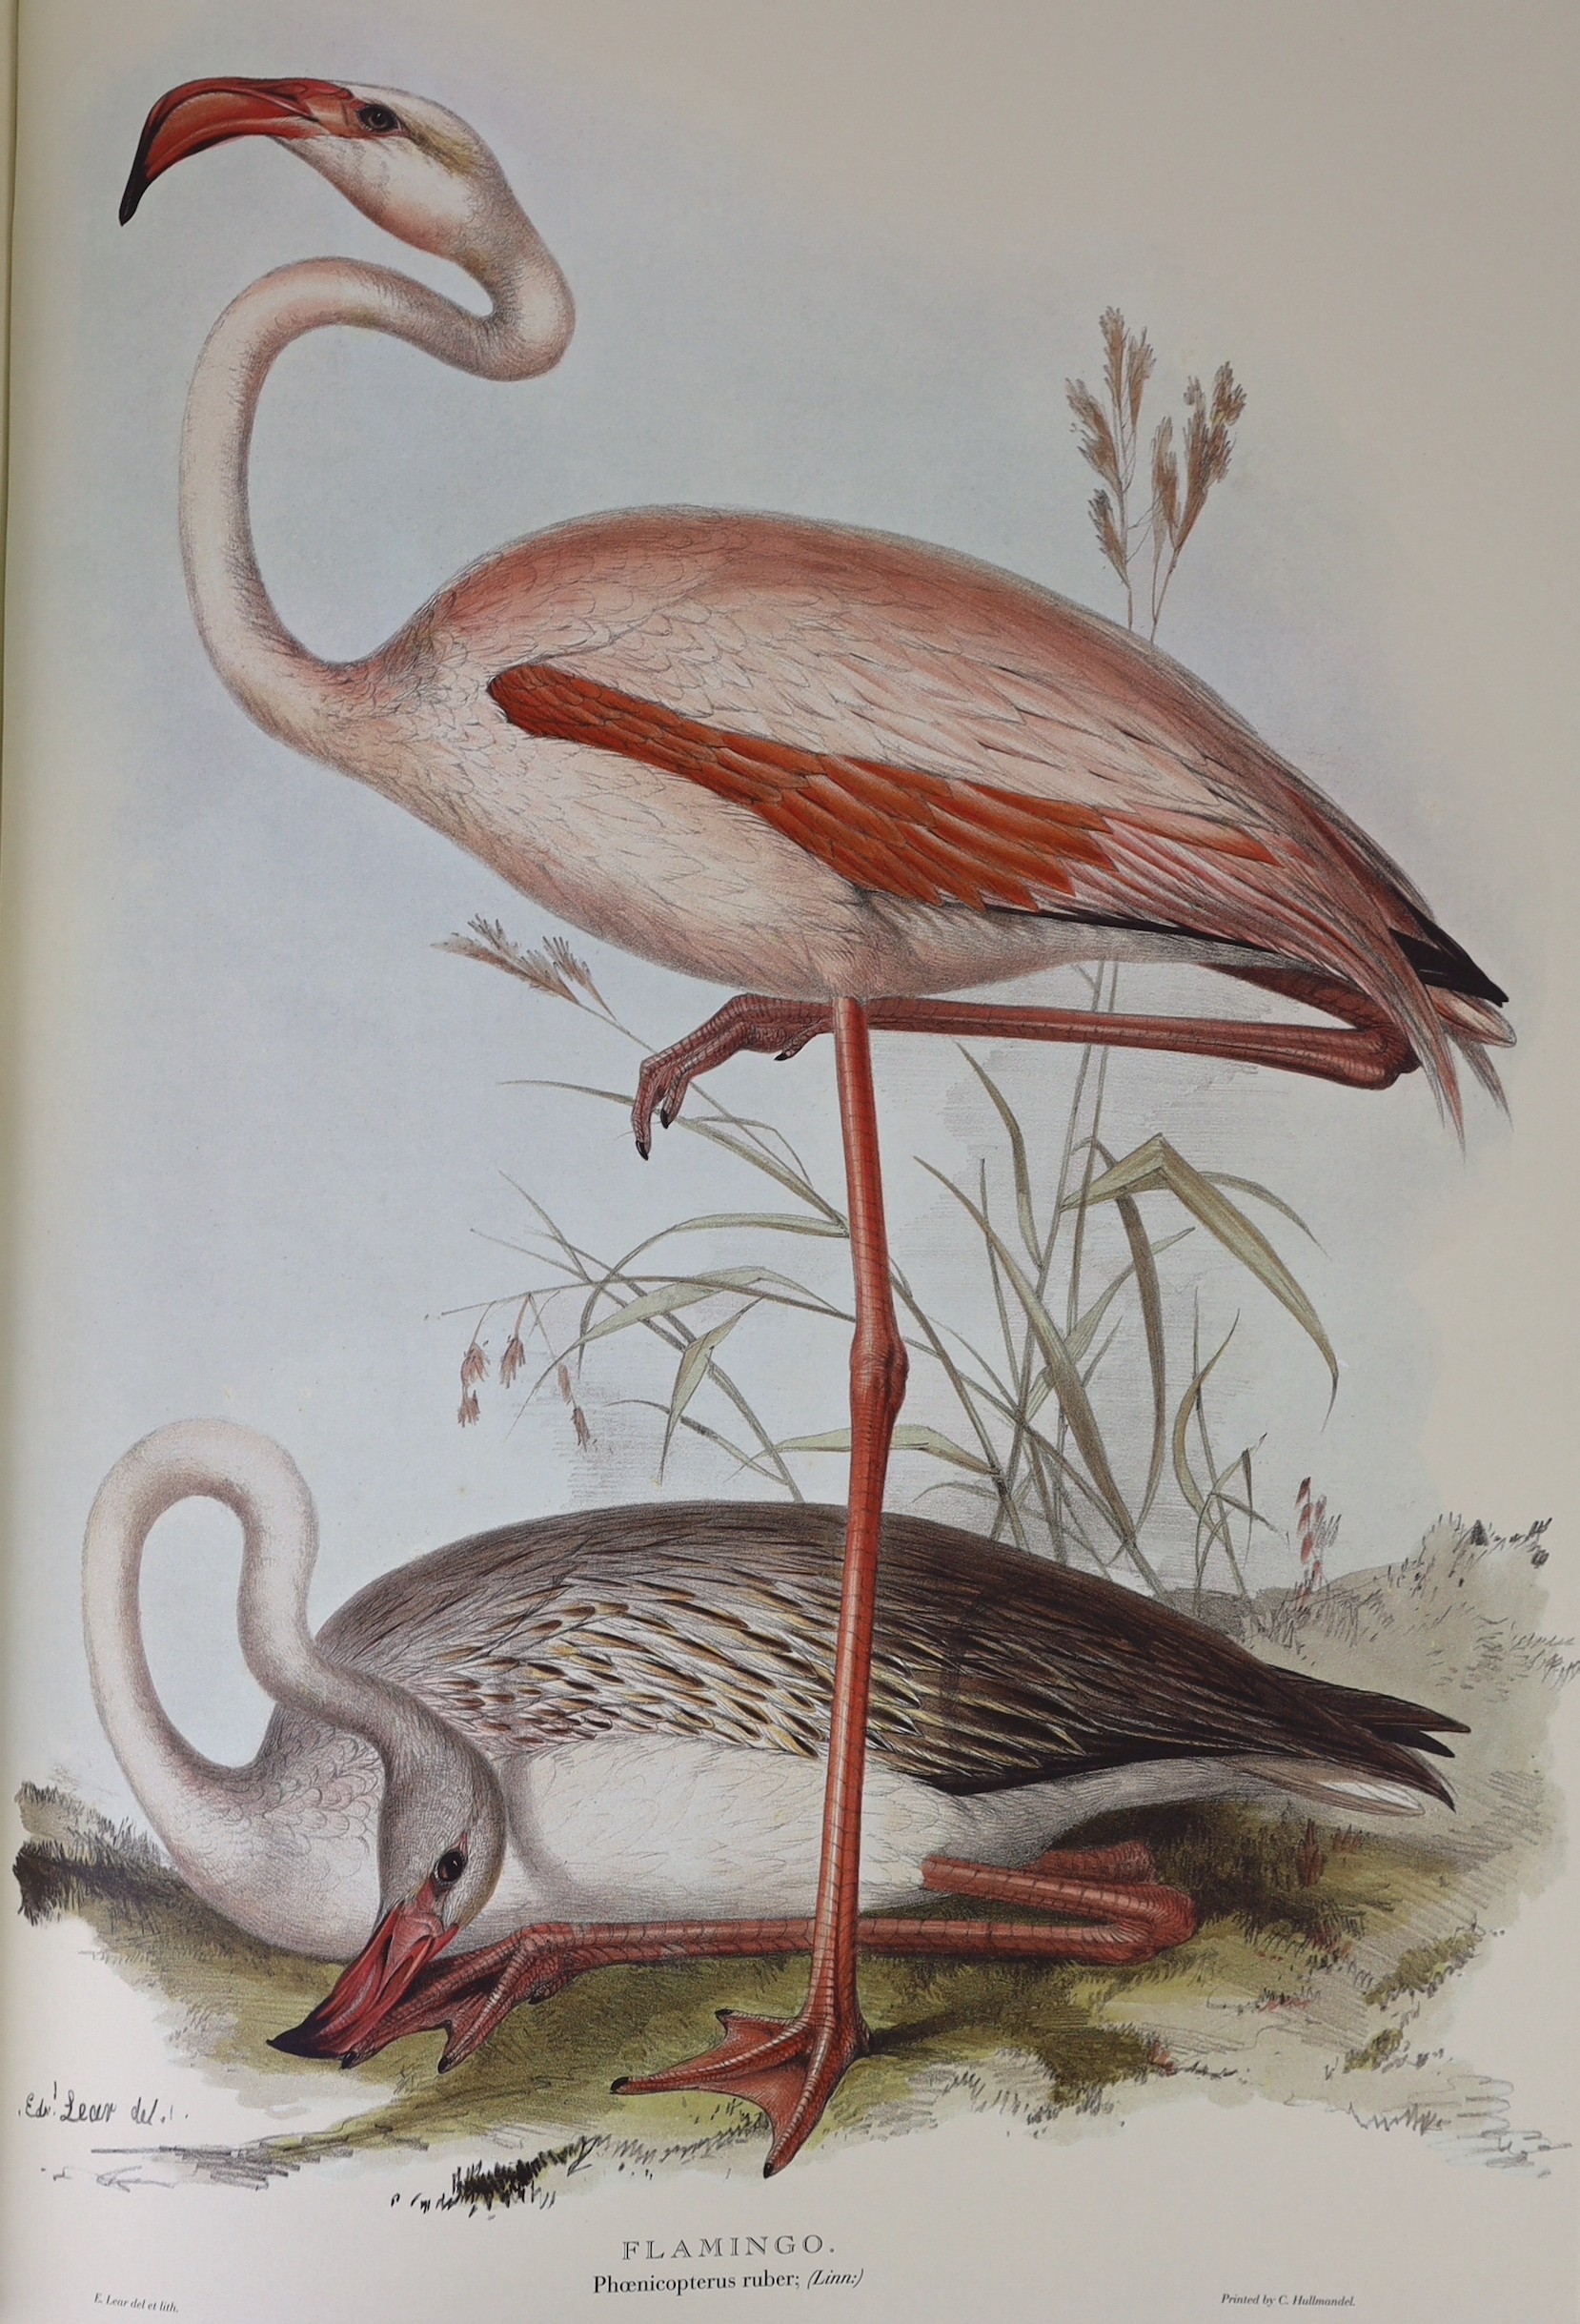 Lear (Edward). Illustrations of Birds, drawn for John Gould, collected and introduced by David Attenborough, facsimile edition, Folio Society, 2012